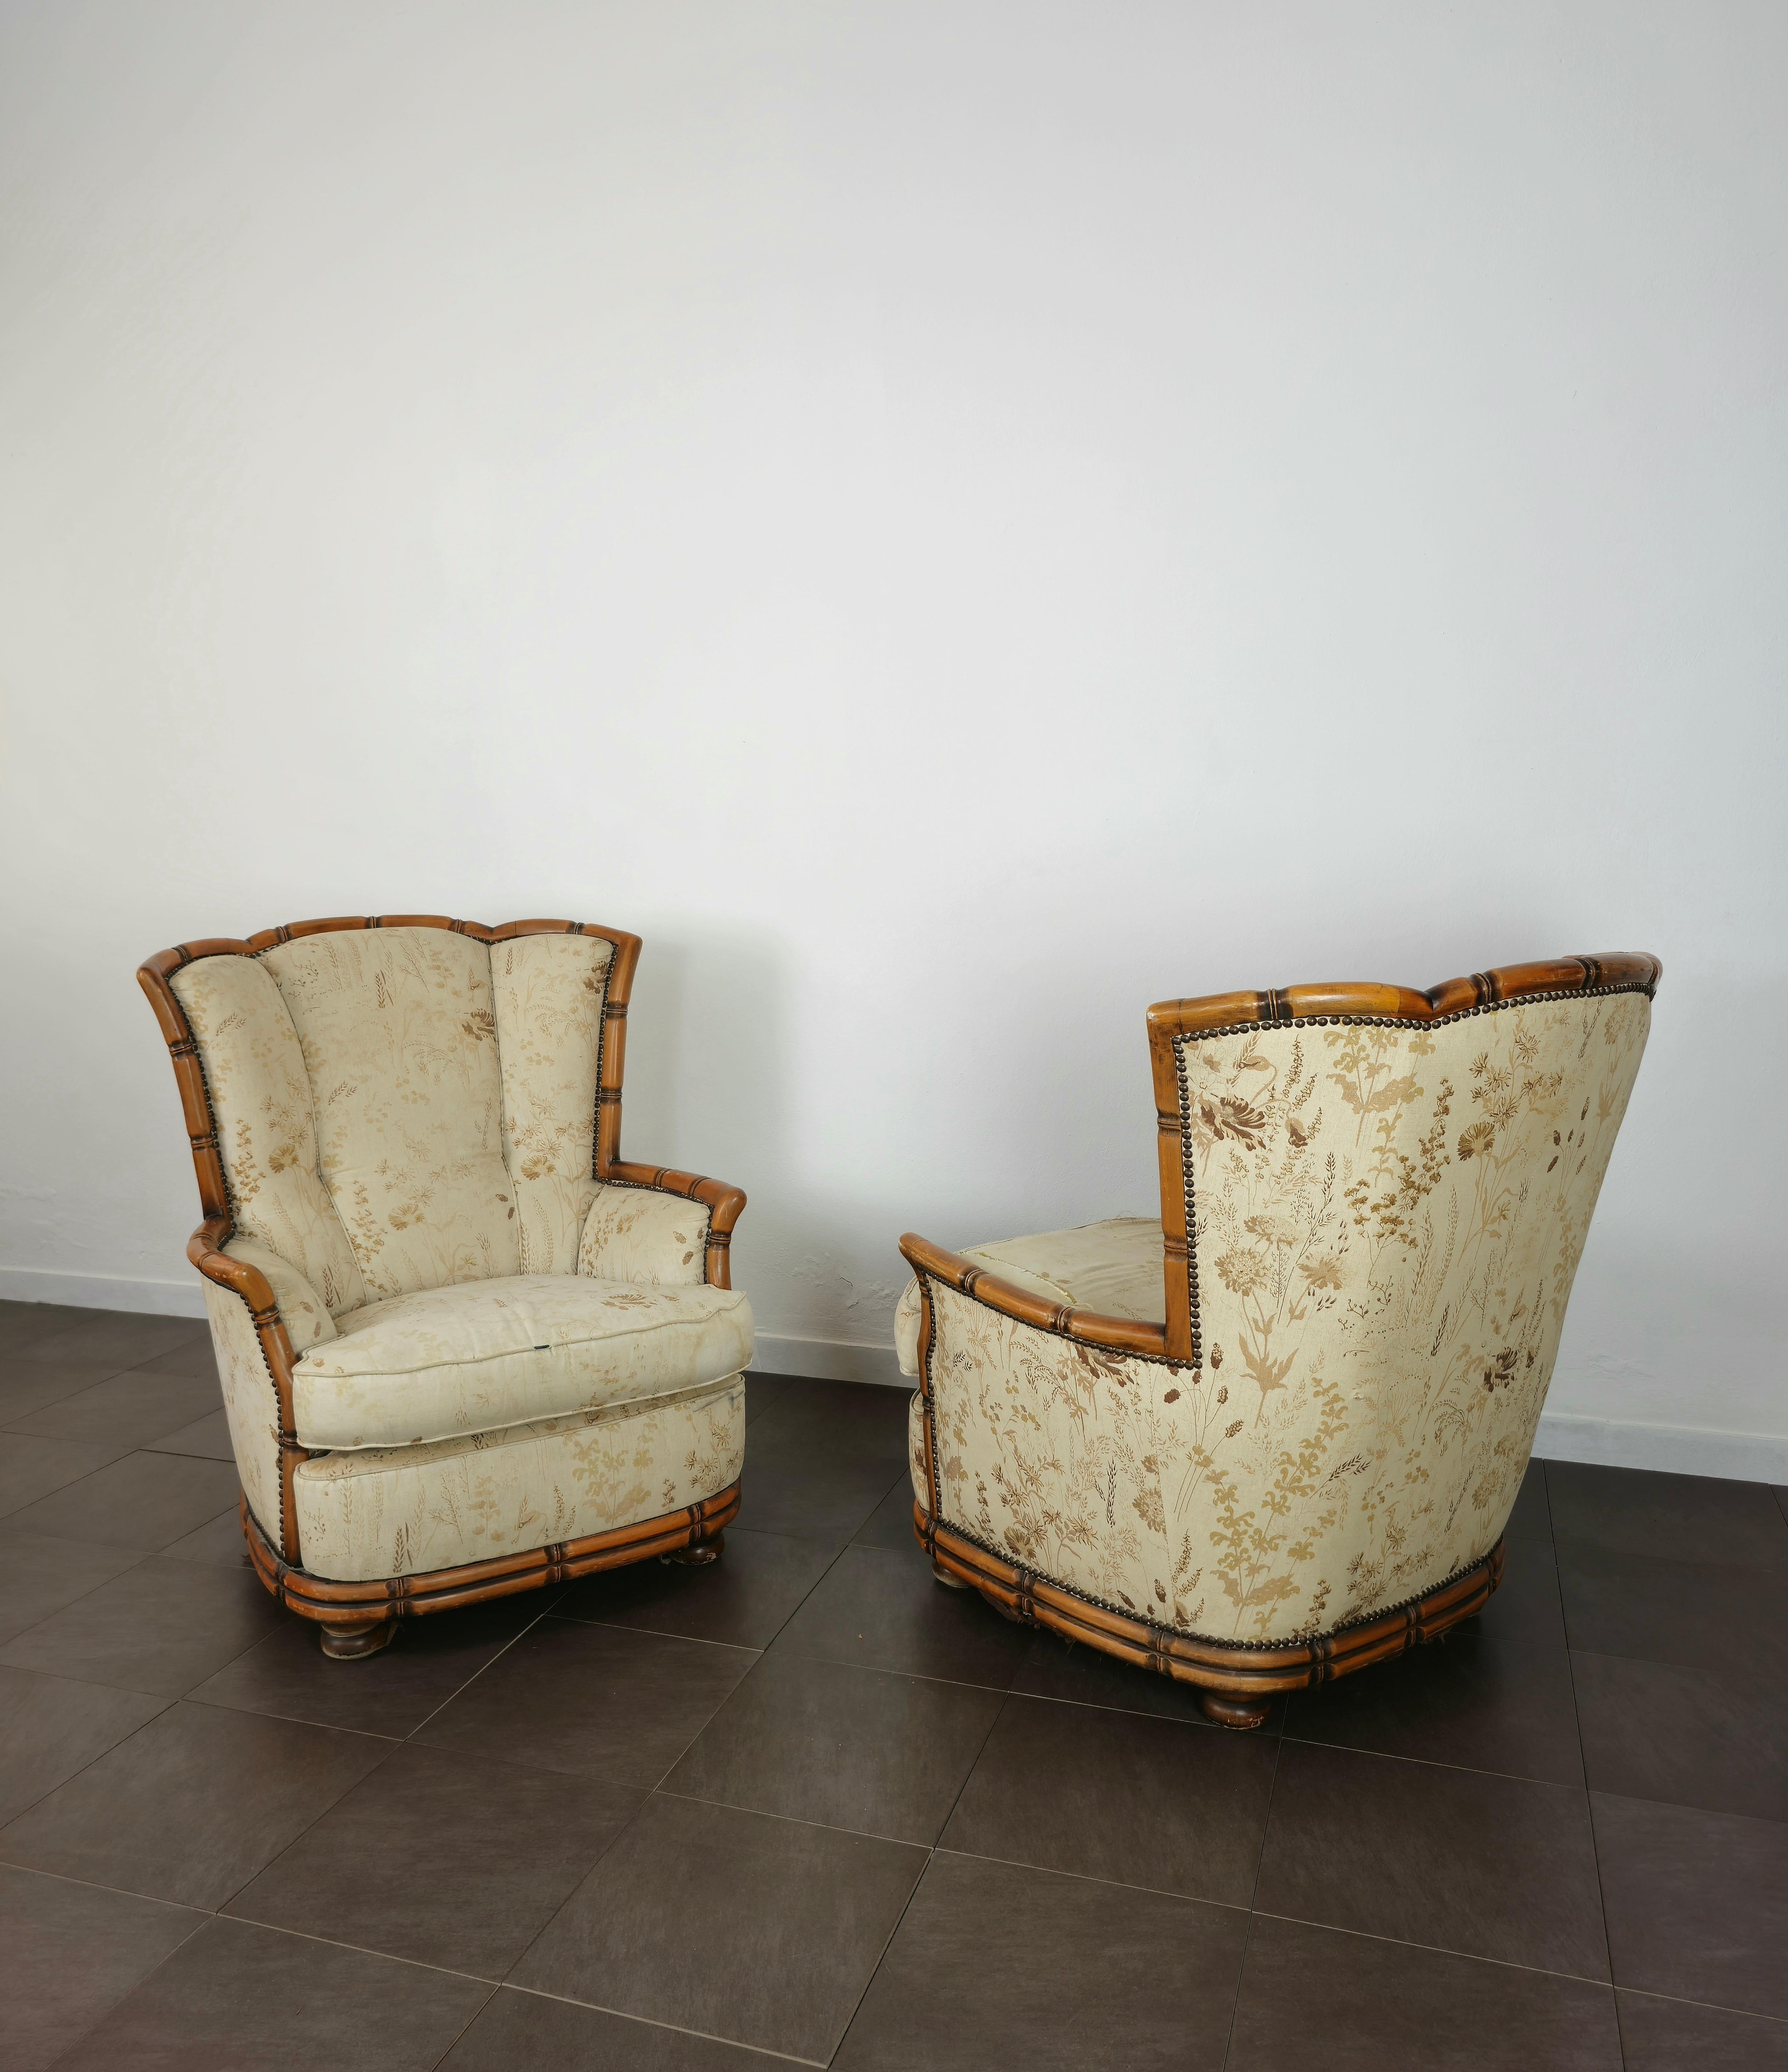 Pair of Armchairs Wood Fabric Giorgetti Midcentury Modern Italian Design 1960s In Fair Condition For Sale In Palermo, IT